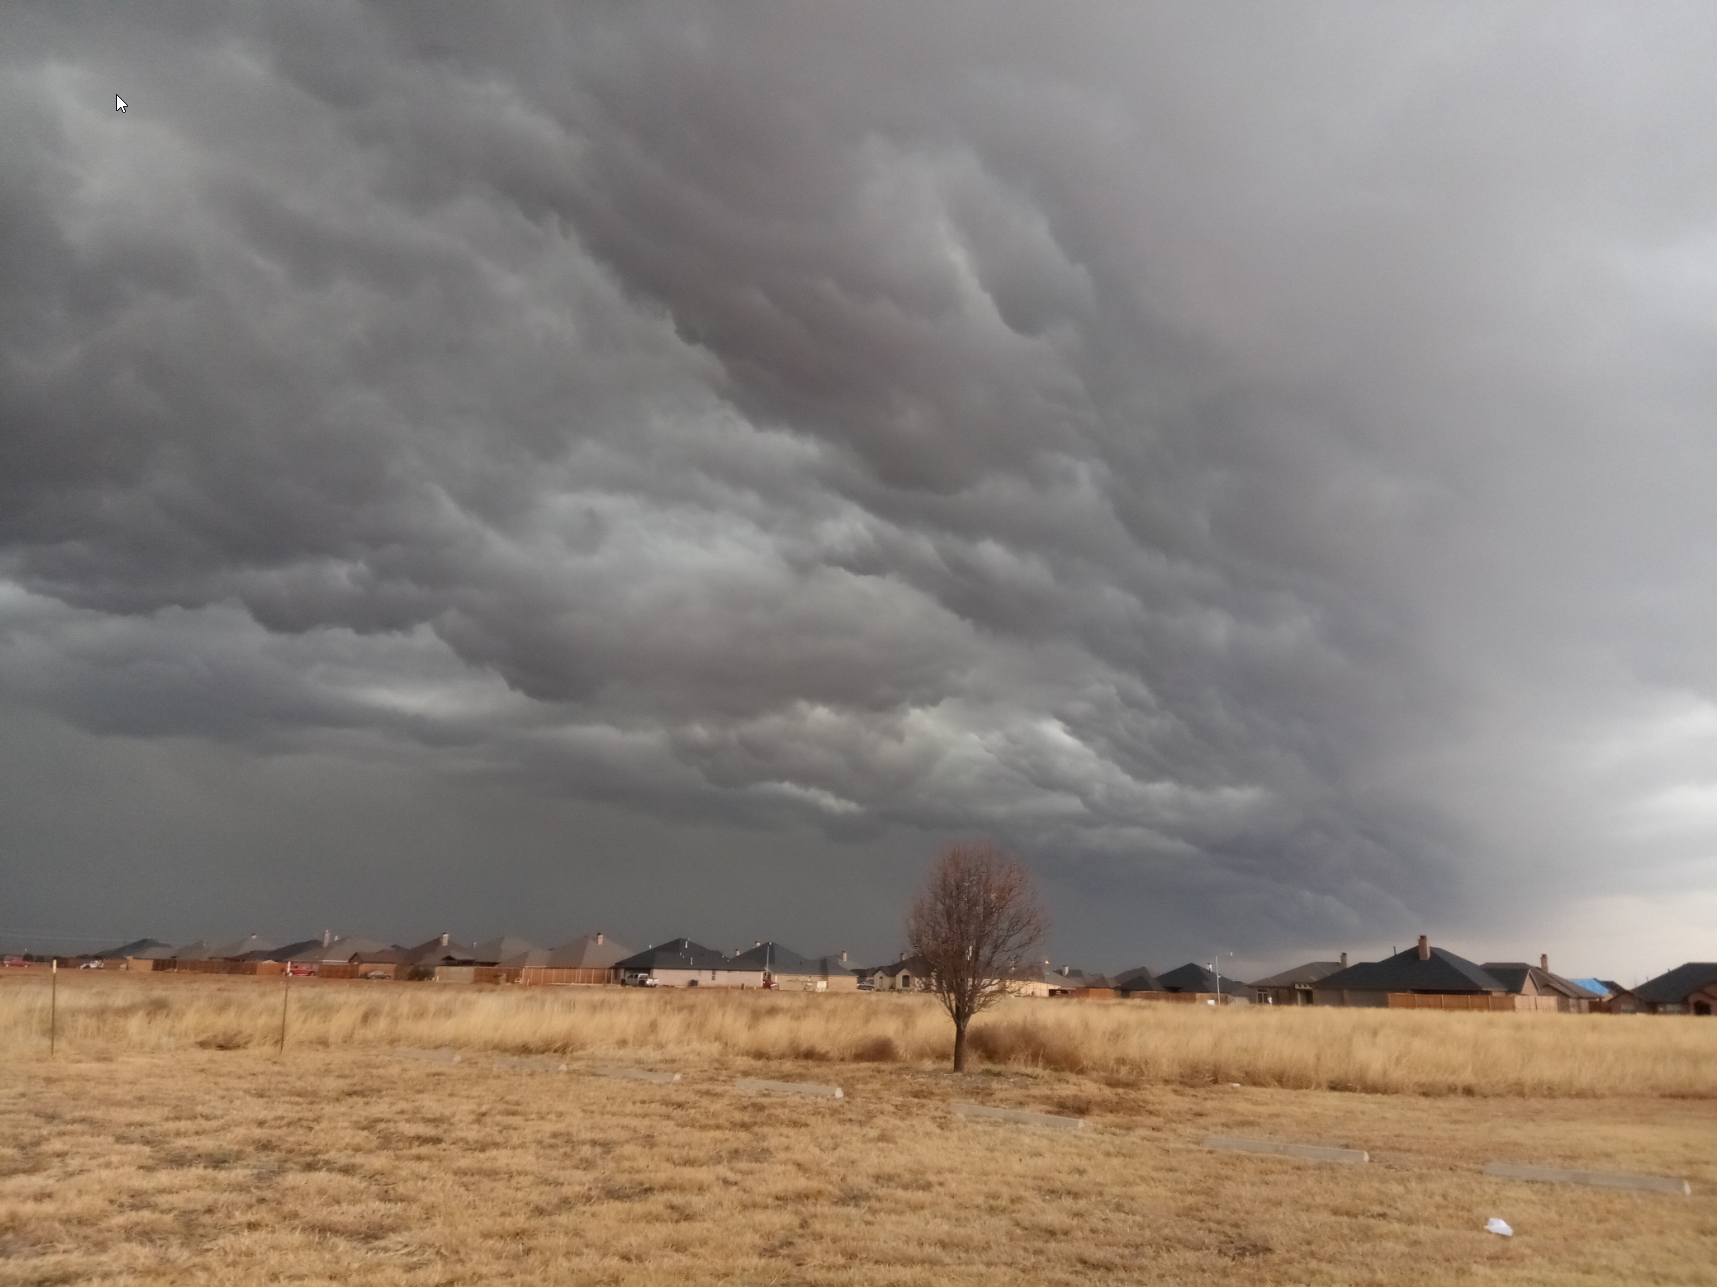 Leading edge of a line of thunderstorms moving into Lubbock around 2 pm on Wednesday, 26 December 2018.